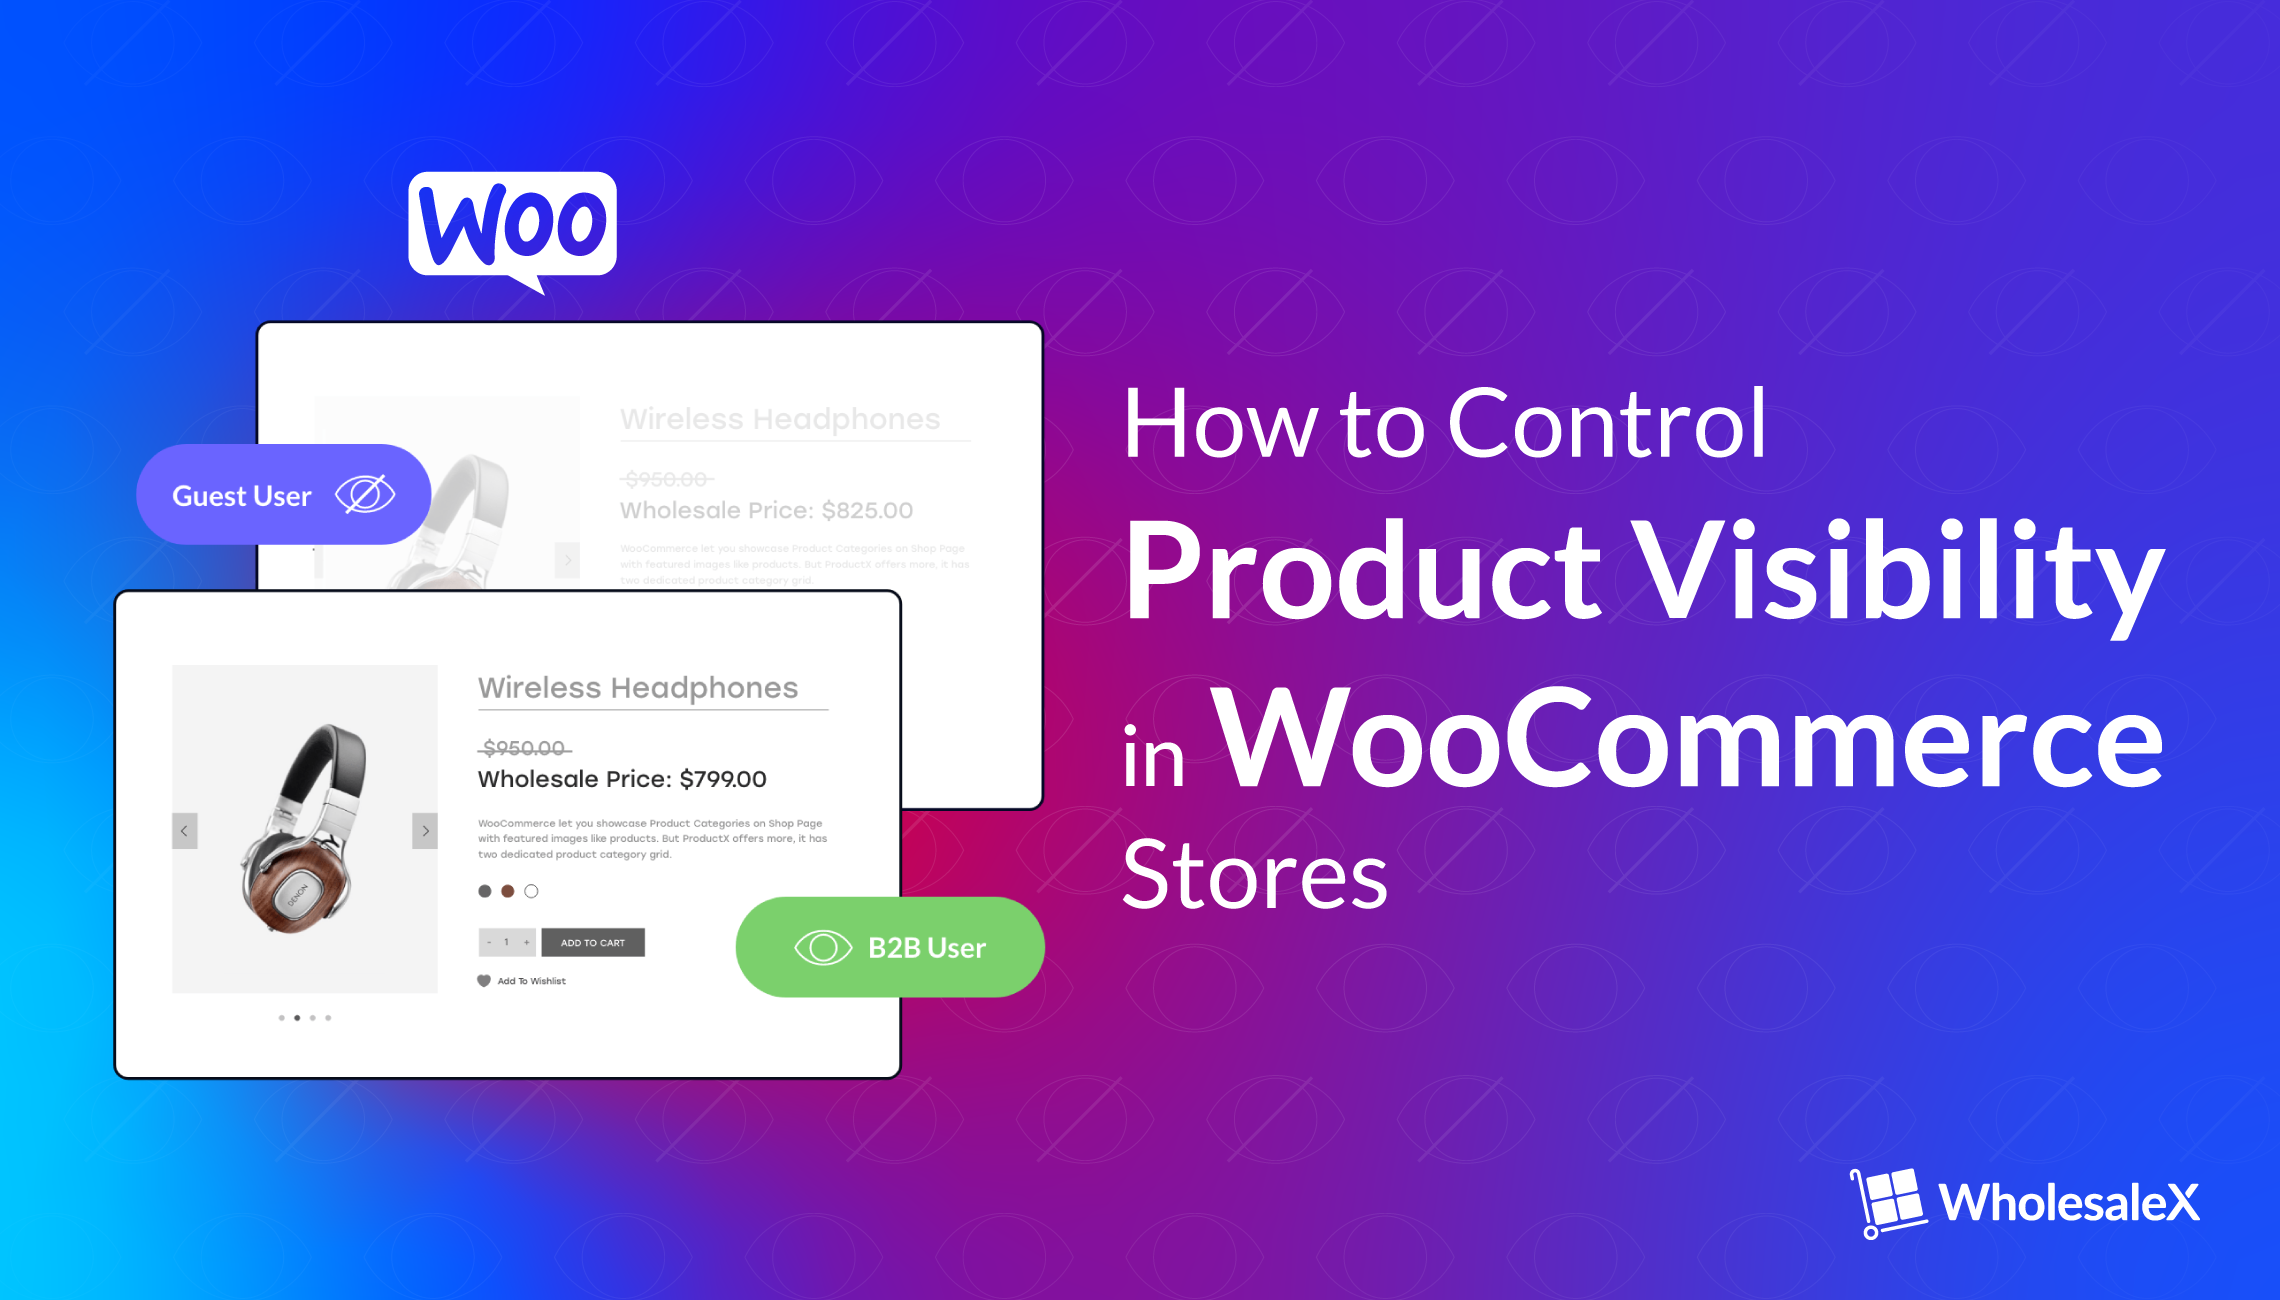 How to Control Product Visibility in WooCommerce Store